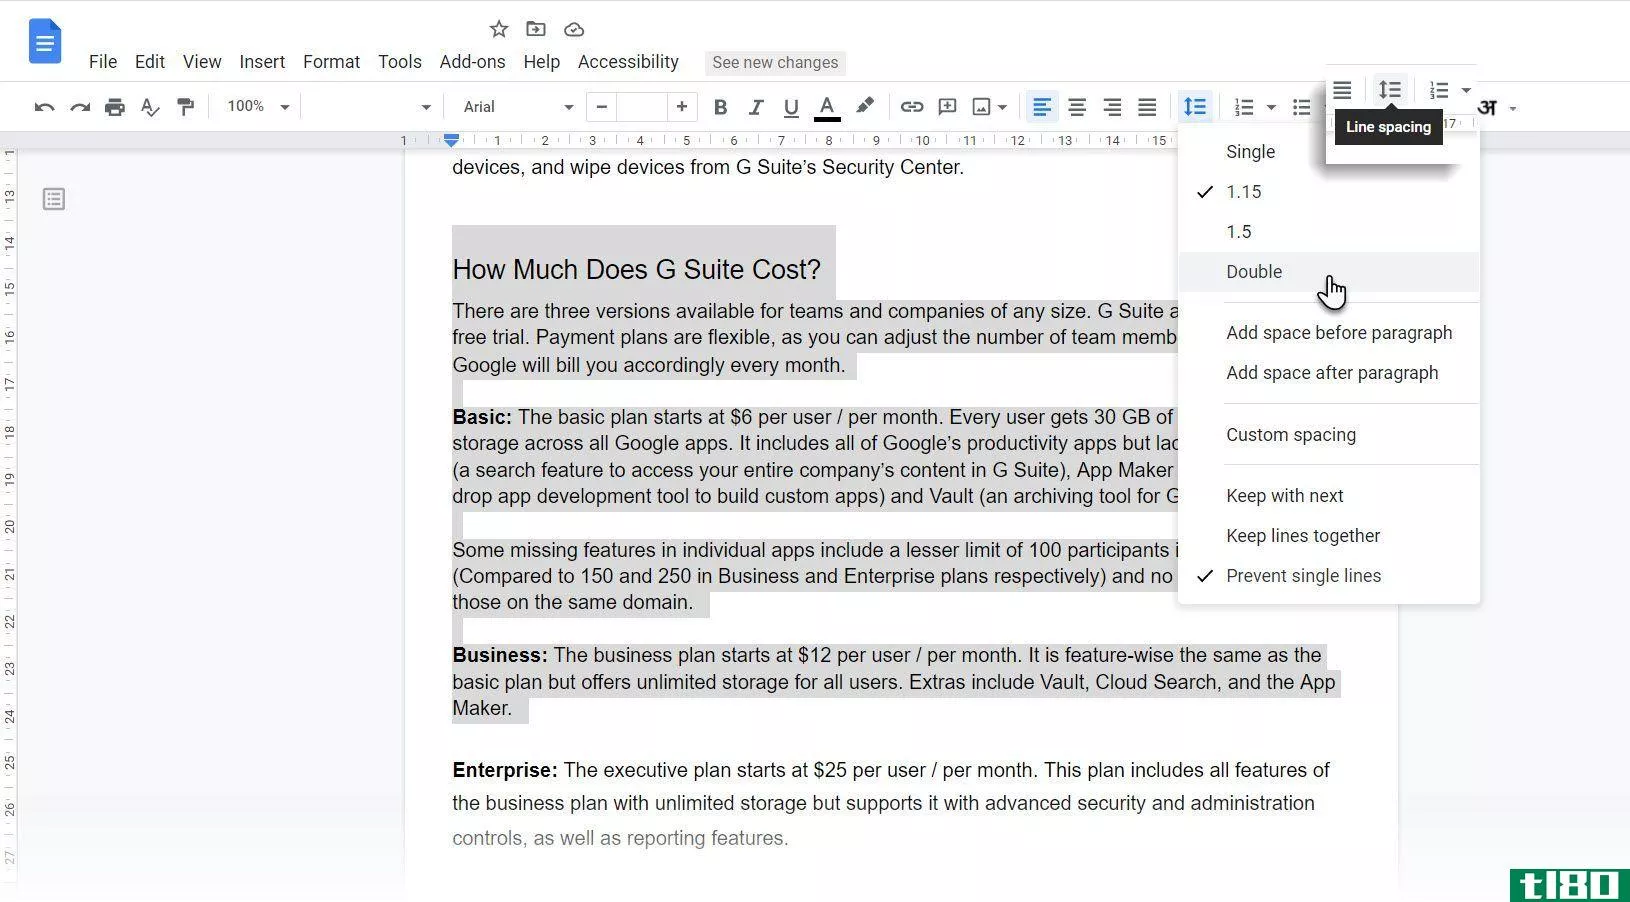 Choosing the double line spacing option from the toolbar in Google Docs